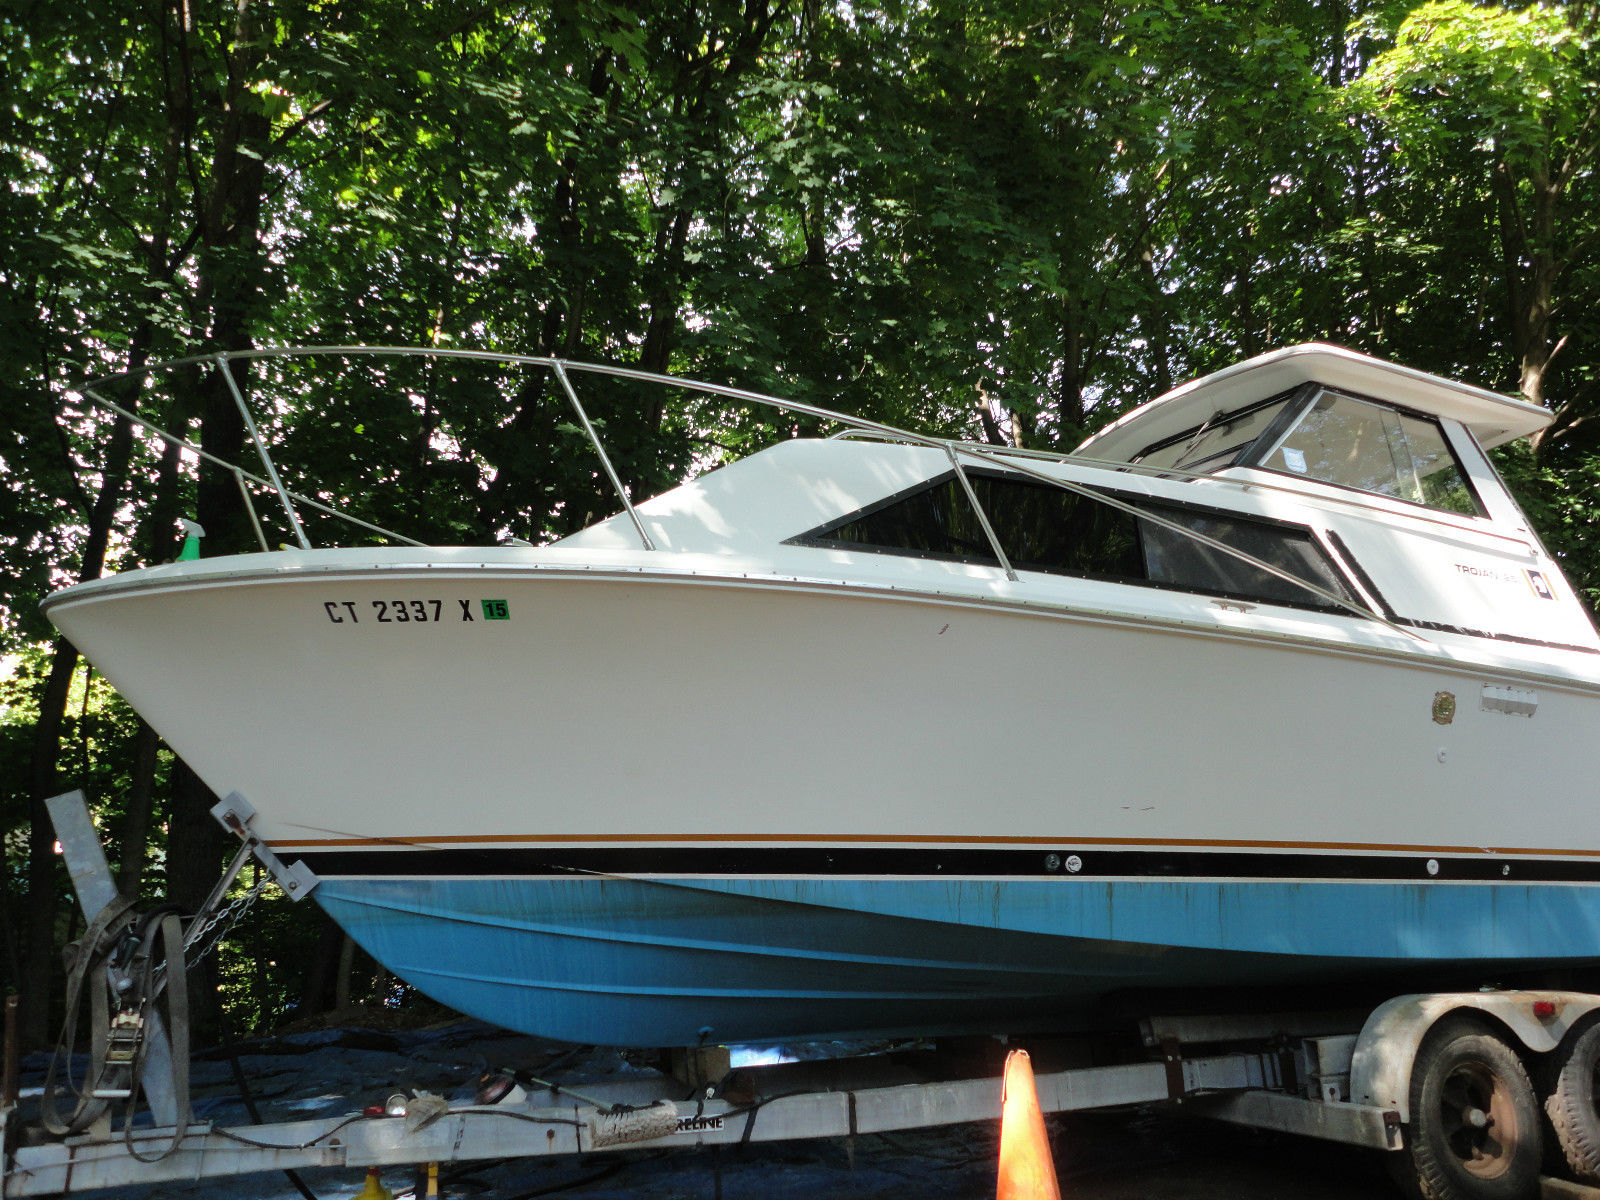 25ft 1979 Trojan Cruiser 1979 for sale for $5,000 - Boats-from-USA.com